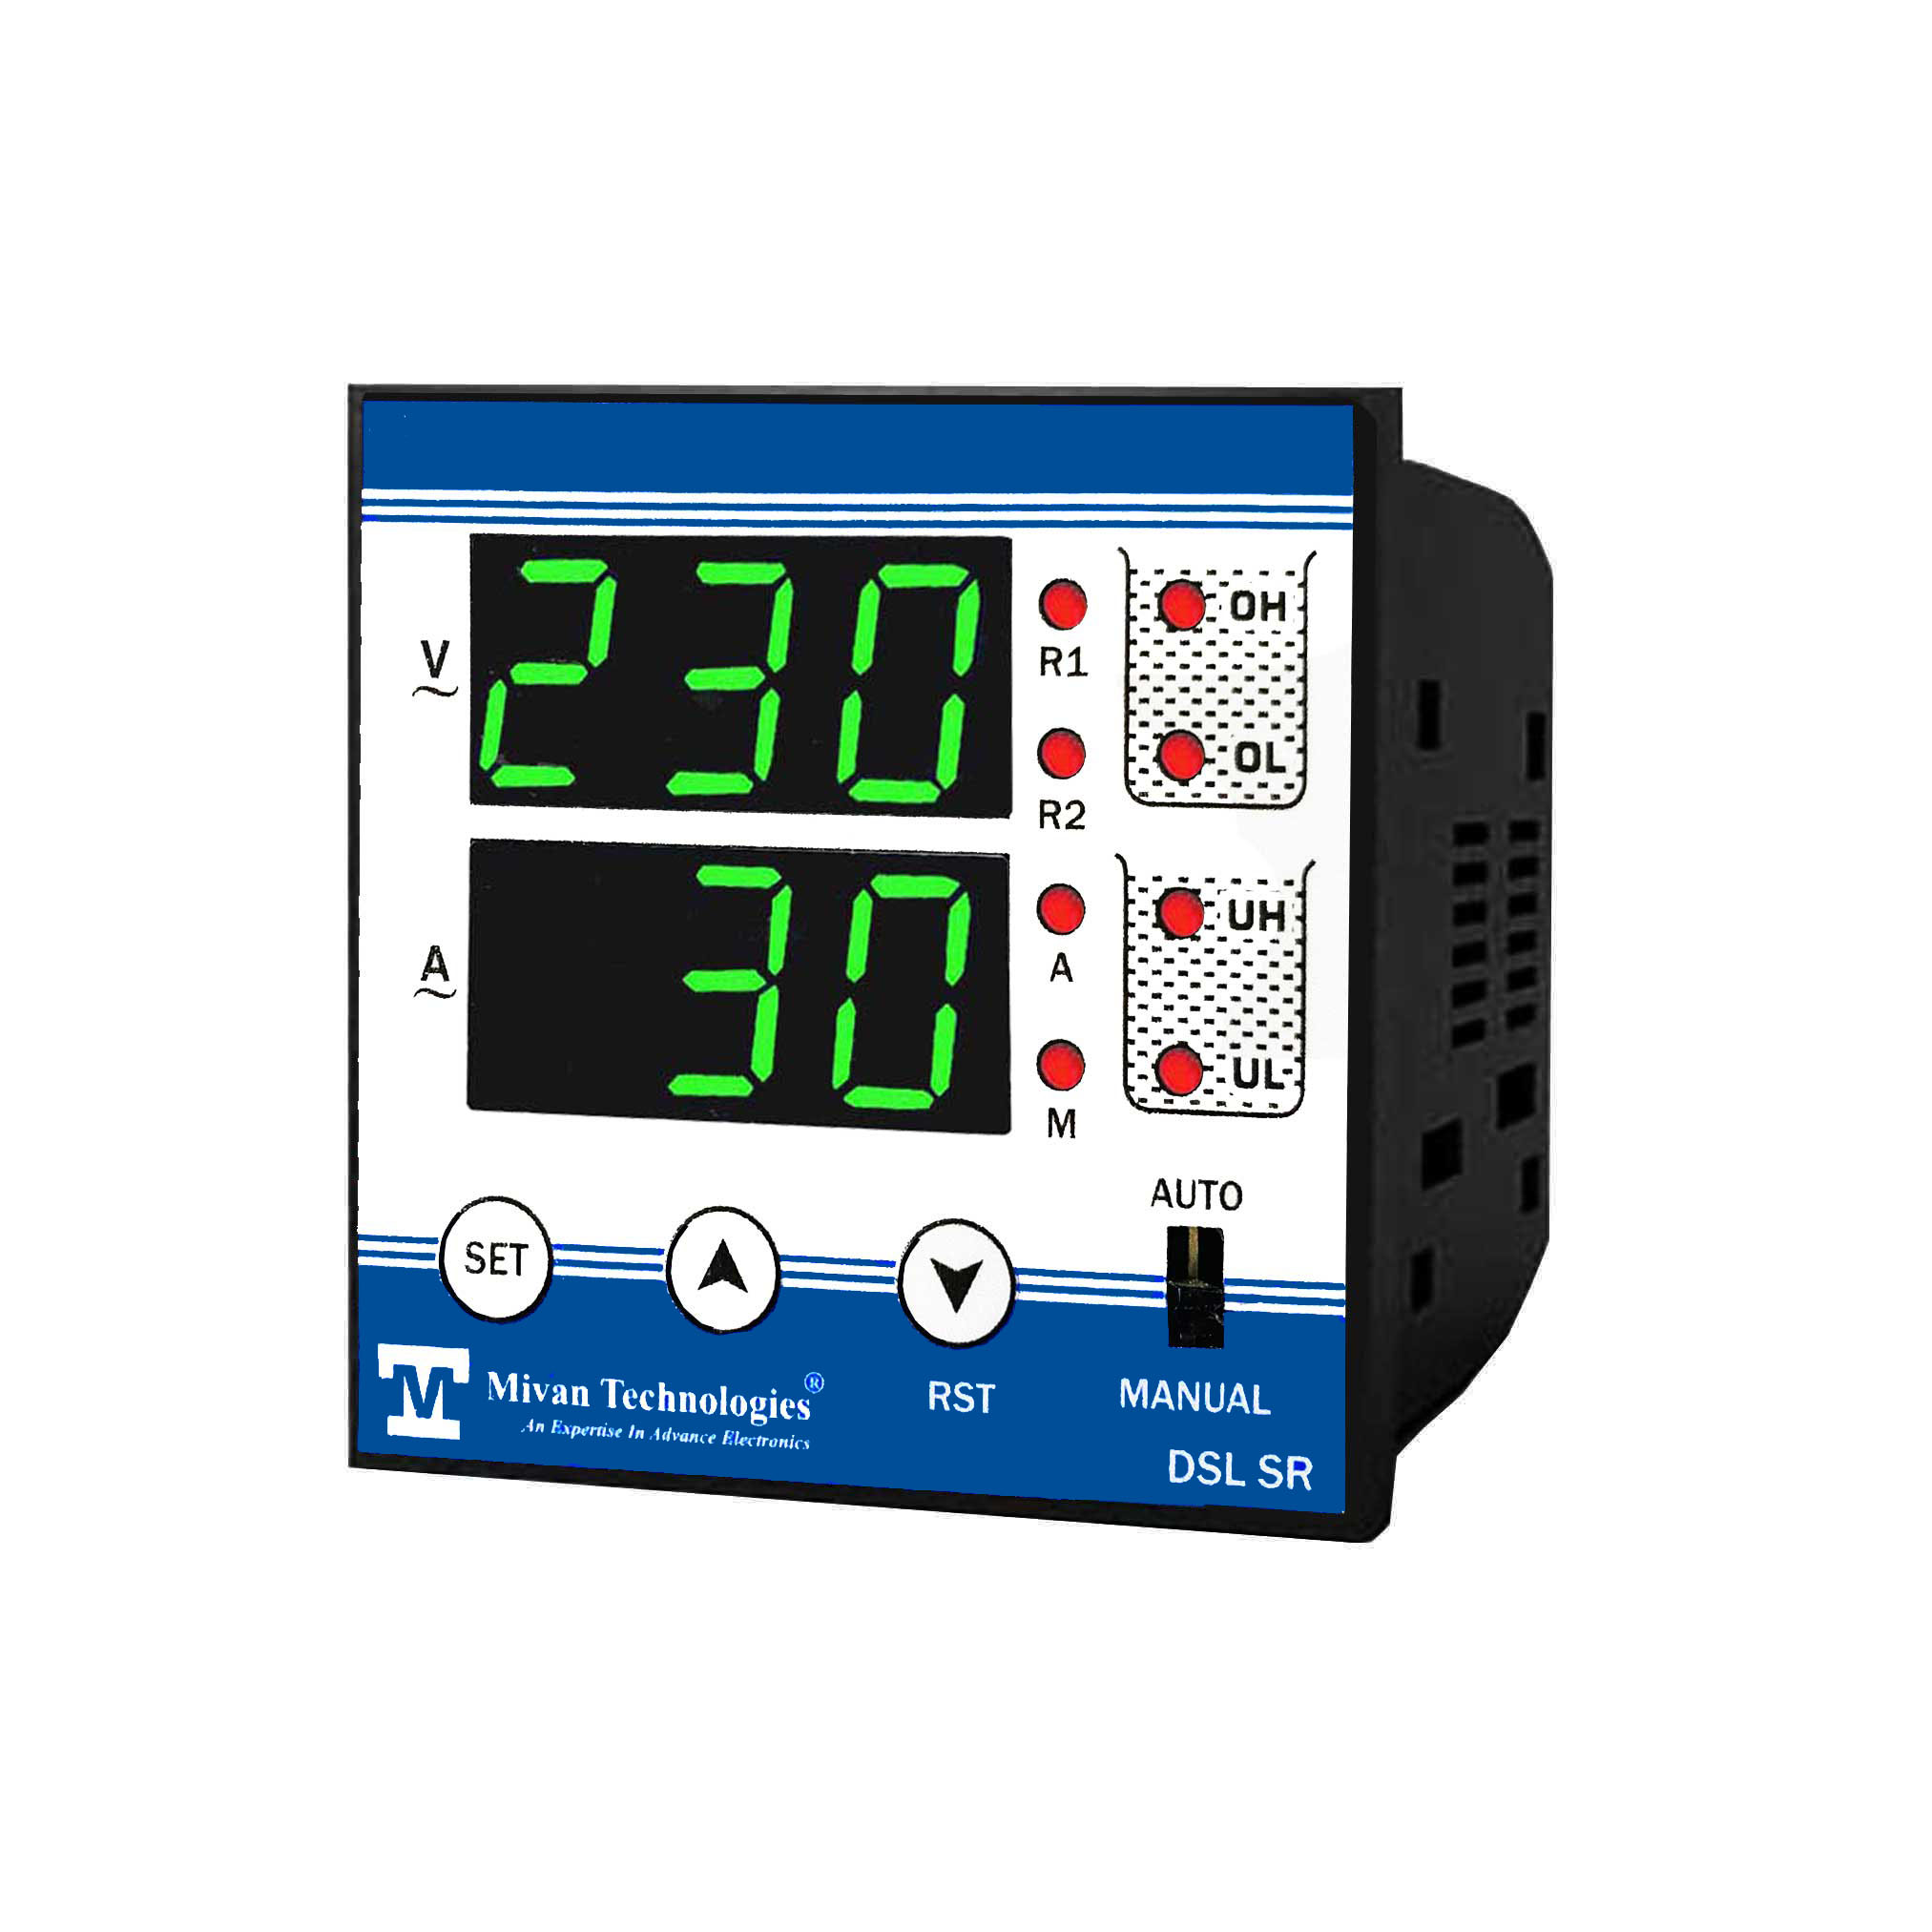 SPDL 7212 instrument to design any hp single phase Digital motor starter with water level controller with volt and amp meter with HV LV OL DRY RUN Protection with CYCLIC timer